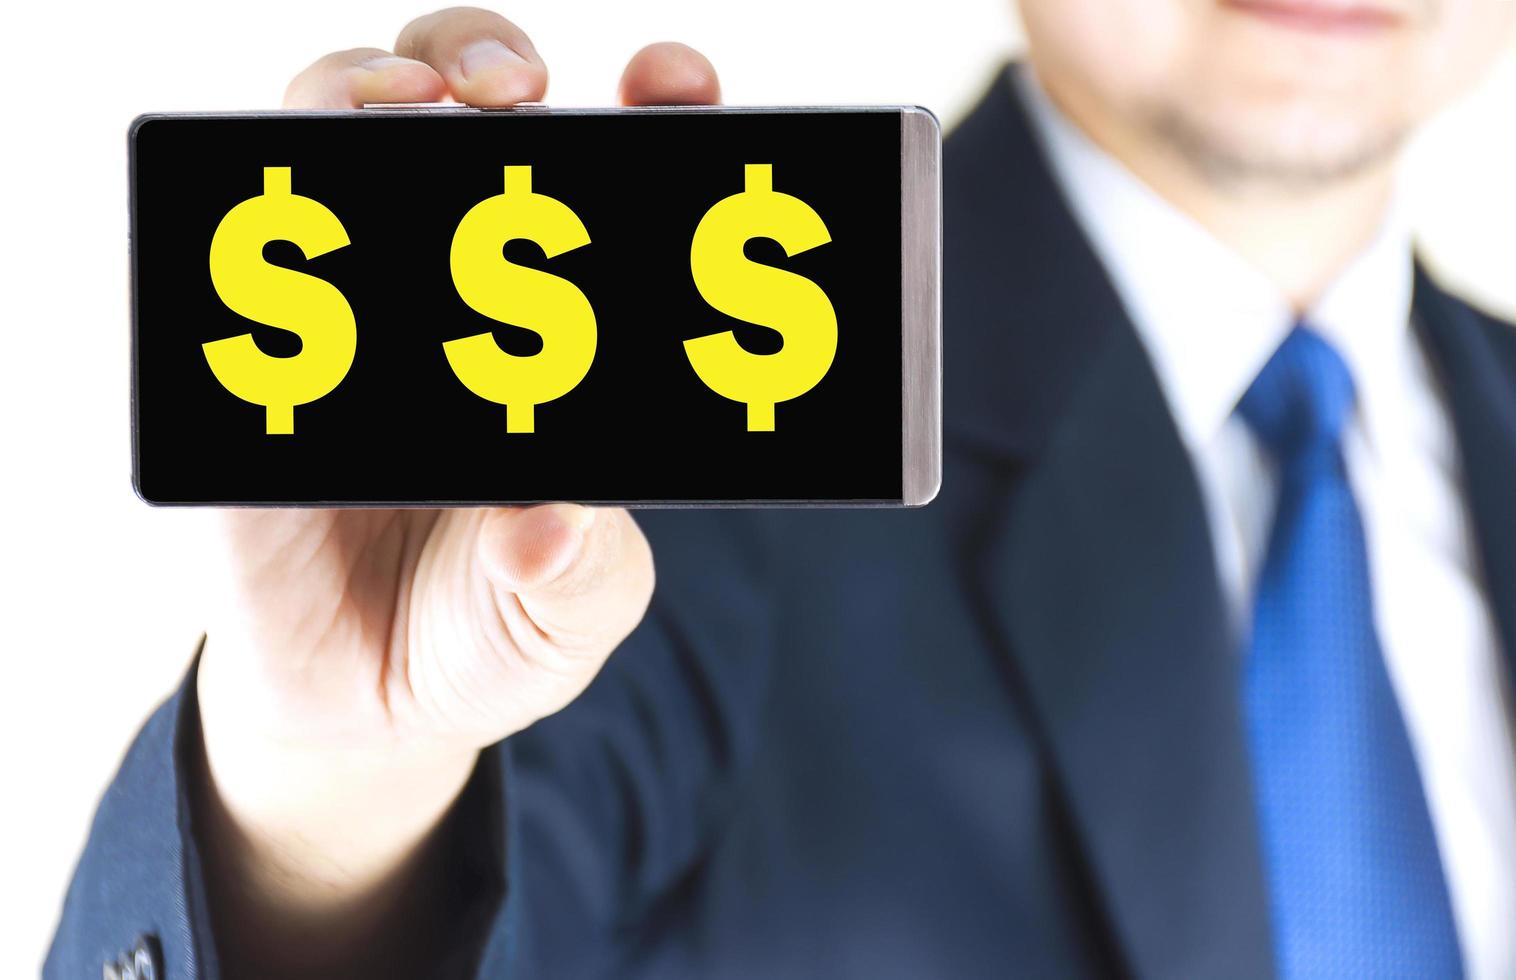 Word on mobile phone screen in blurred young businessman hand over white background, business concept photo